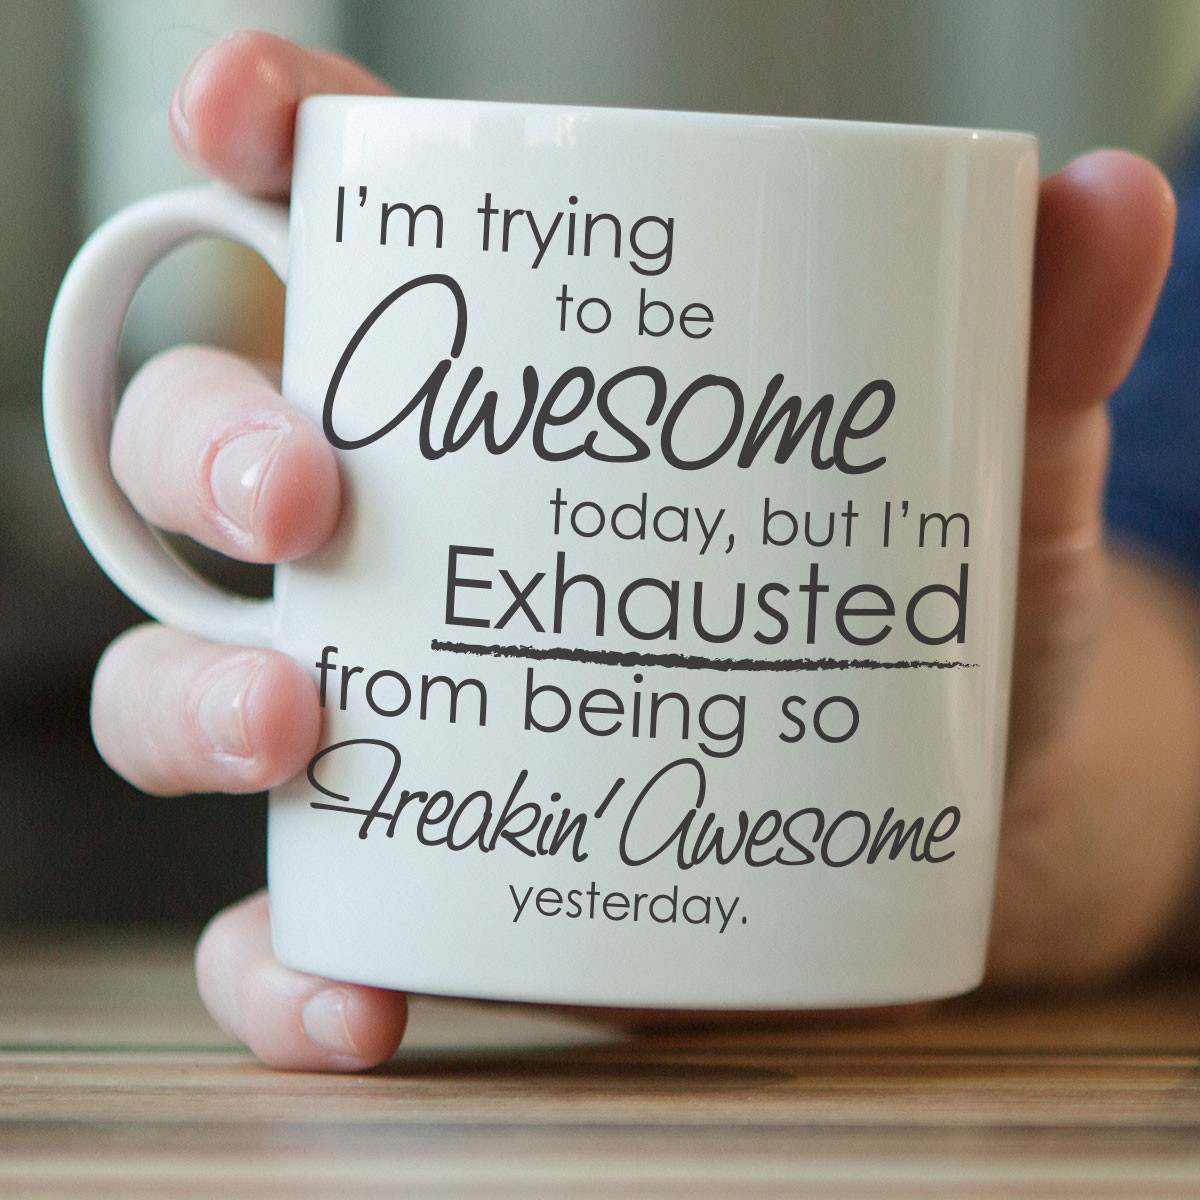 "I'm Trying To Be Awesome Today" Mug